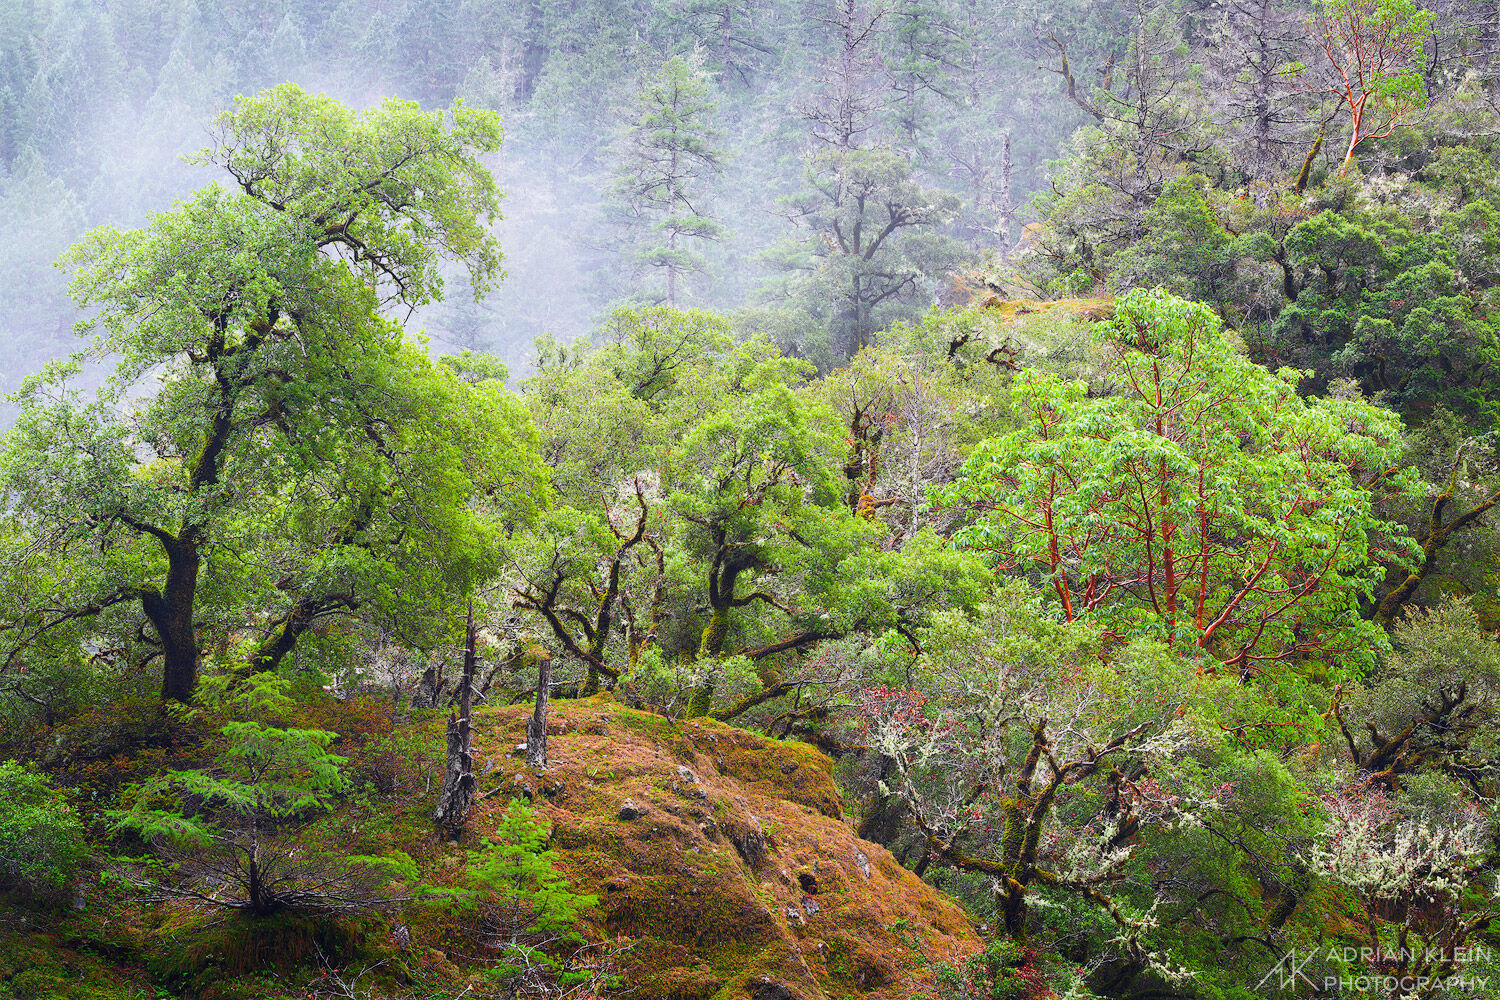 A diverse forest of trees in the cold wet winter fog. Near Redwoods National Park in California. Limited Edition of 50.